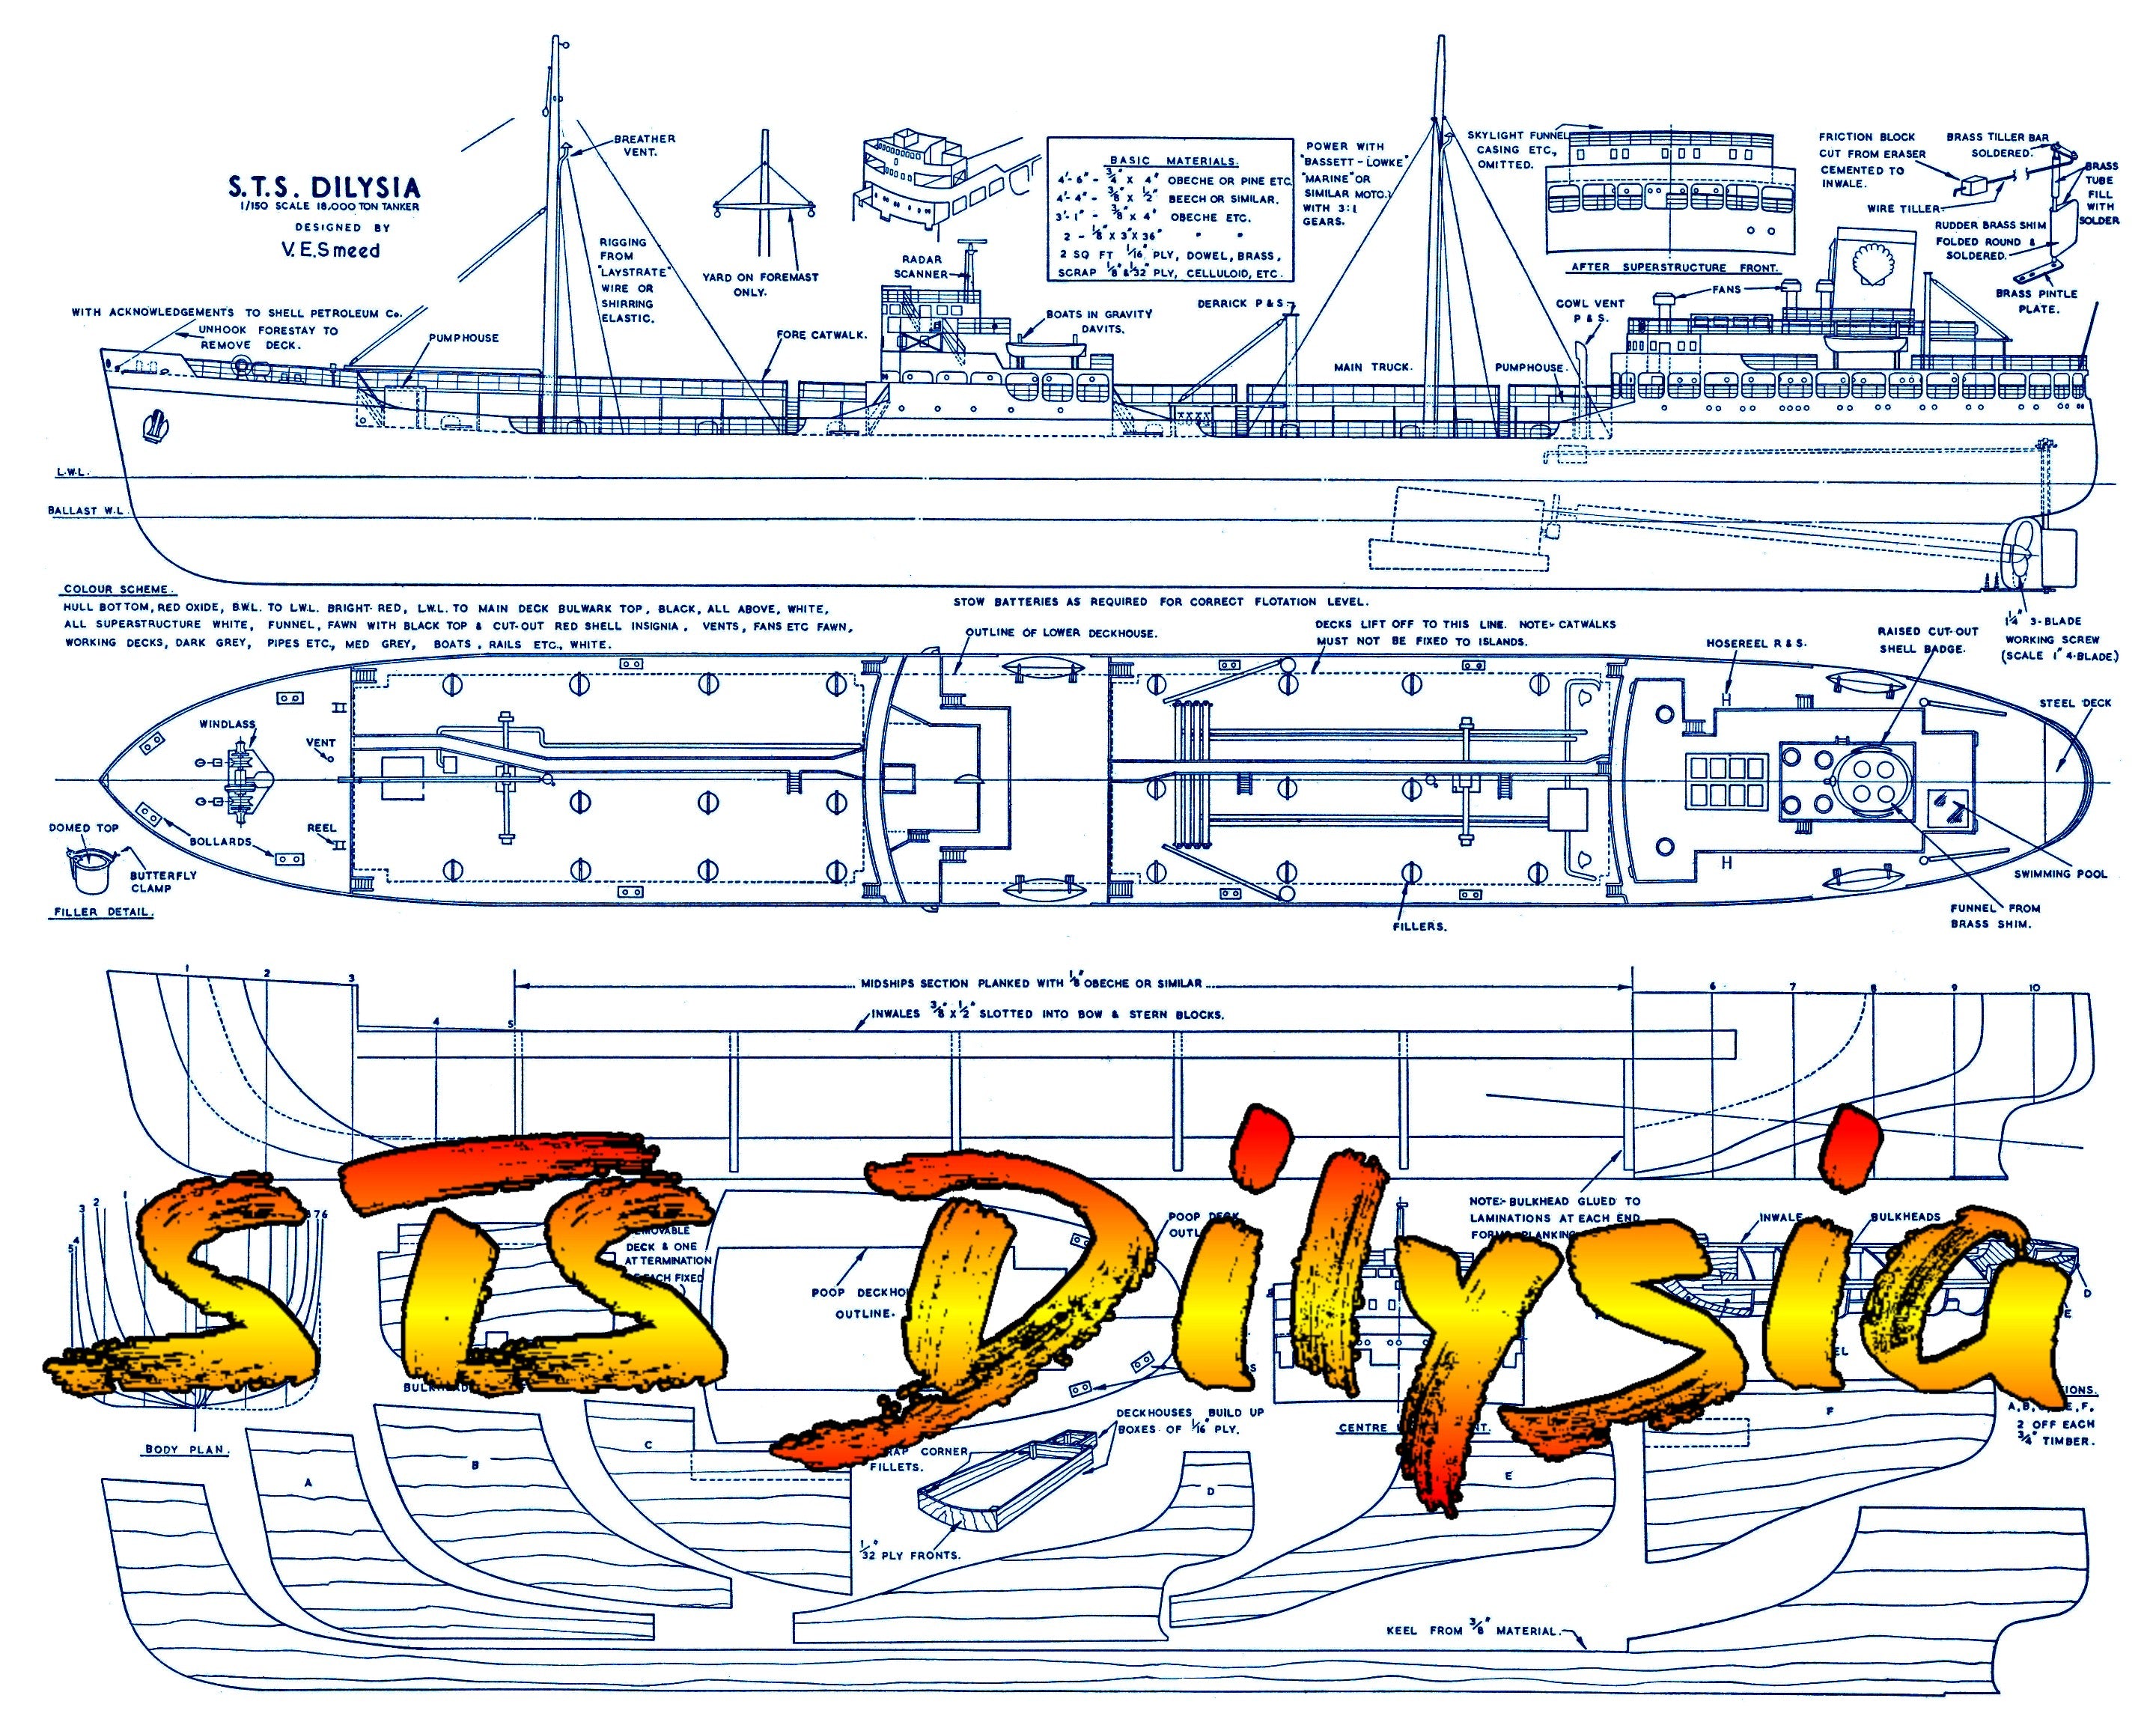 full size printed plan scale 1/150 18000 ton shell oil tanker "sts dilysia" suitable for radio control